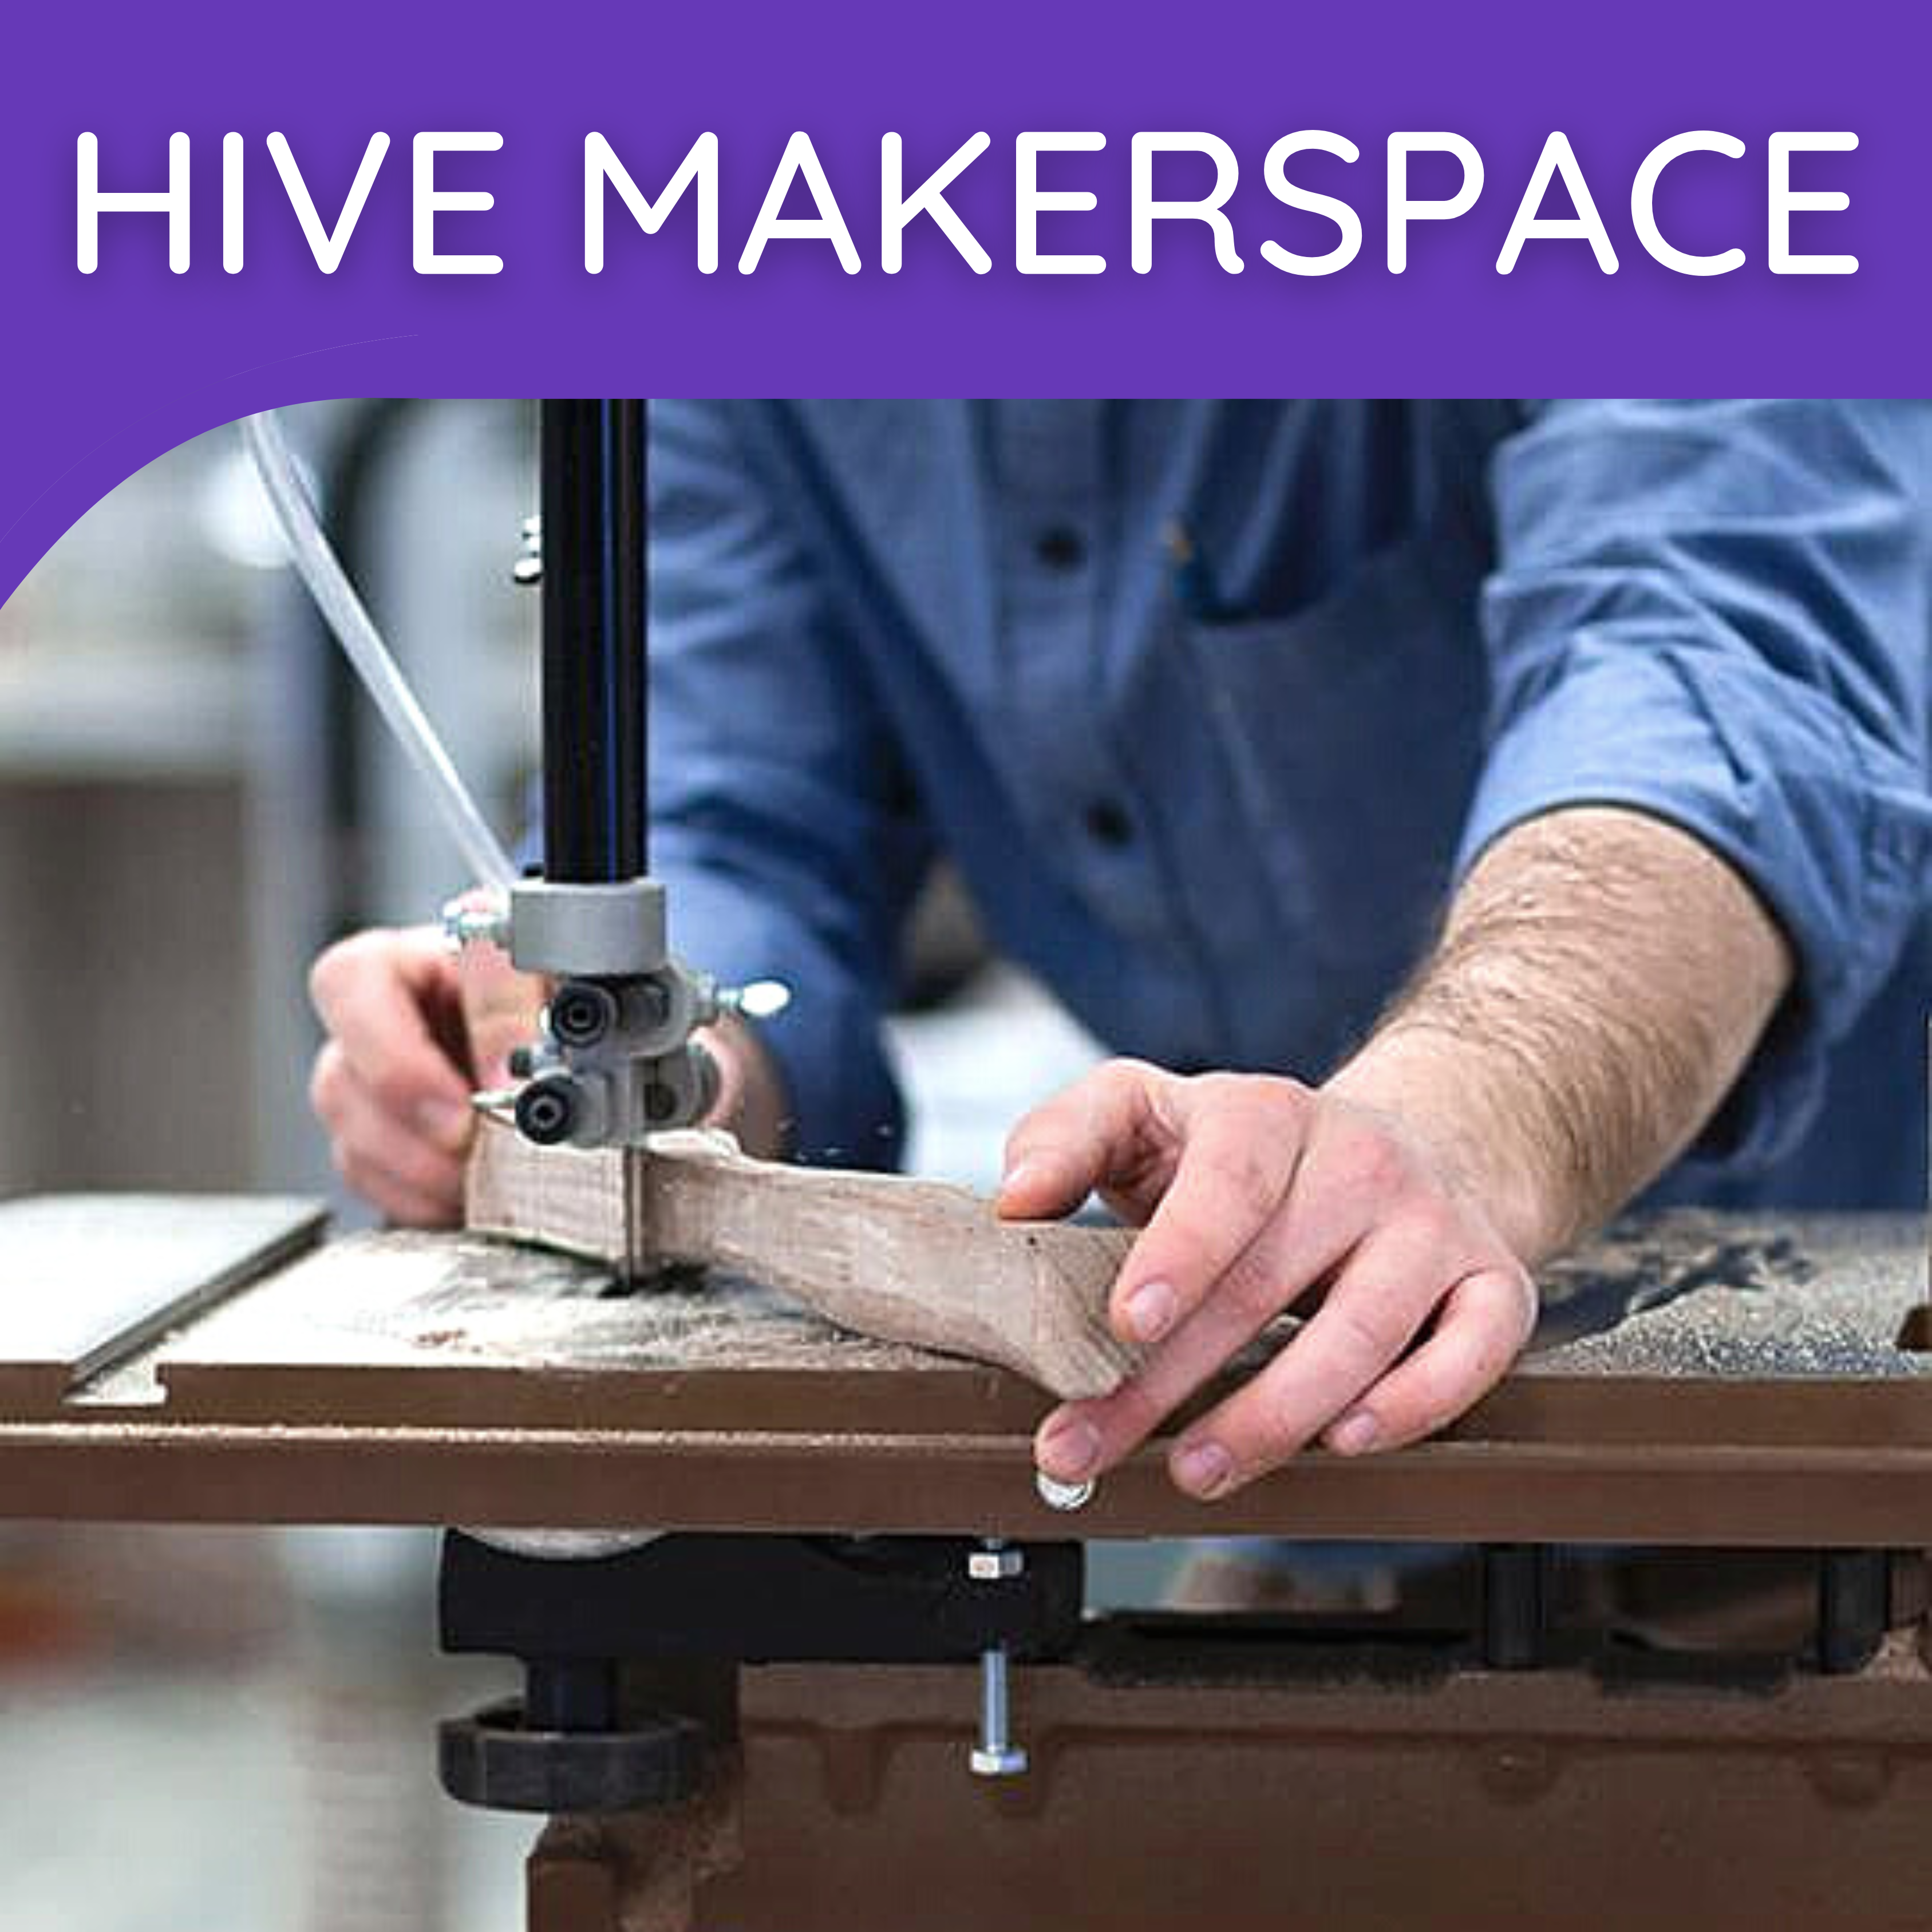 ACC HIVE MakerSpace